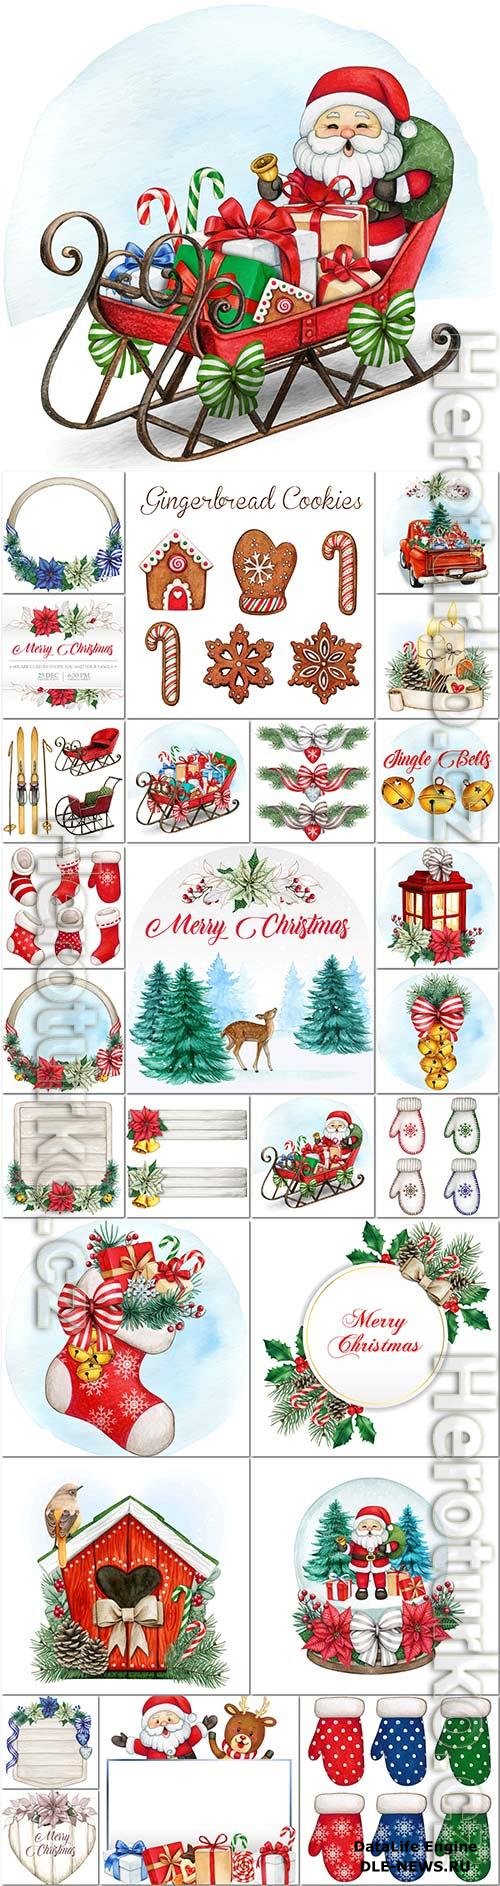 Santa claus and christmas decorations, new year elements in vector